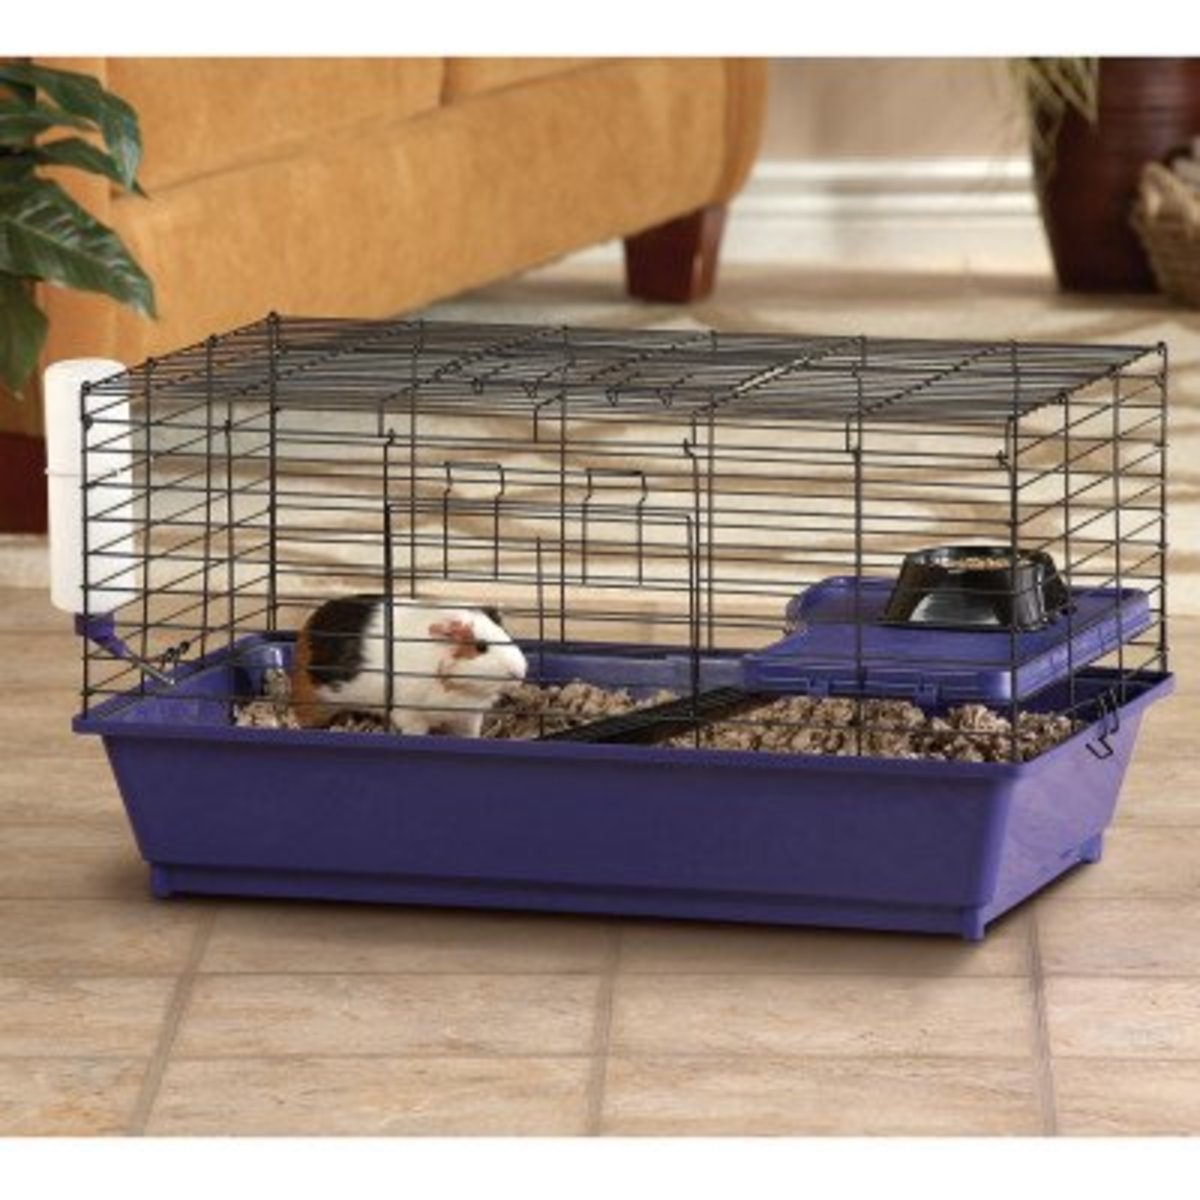 Petsmart says this cage is a "perfectly sized home for your guinea pig". Not only is this cage less than half the size it should be, the $60 you would have spent buying it could have built you a C&C cage in the right size, with cash to spare.